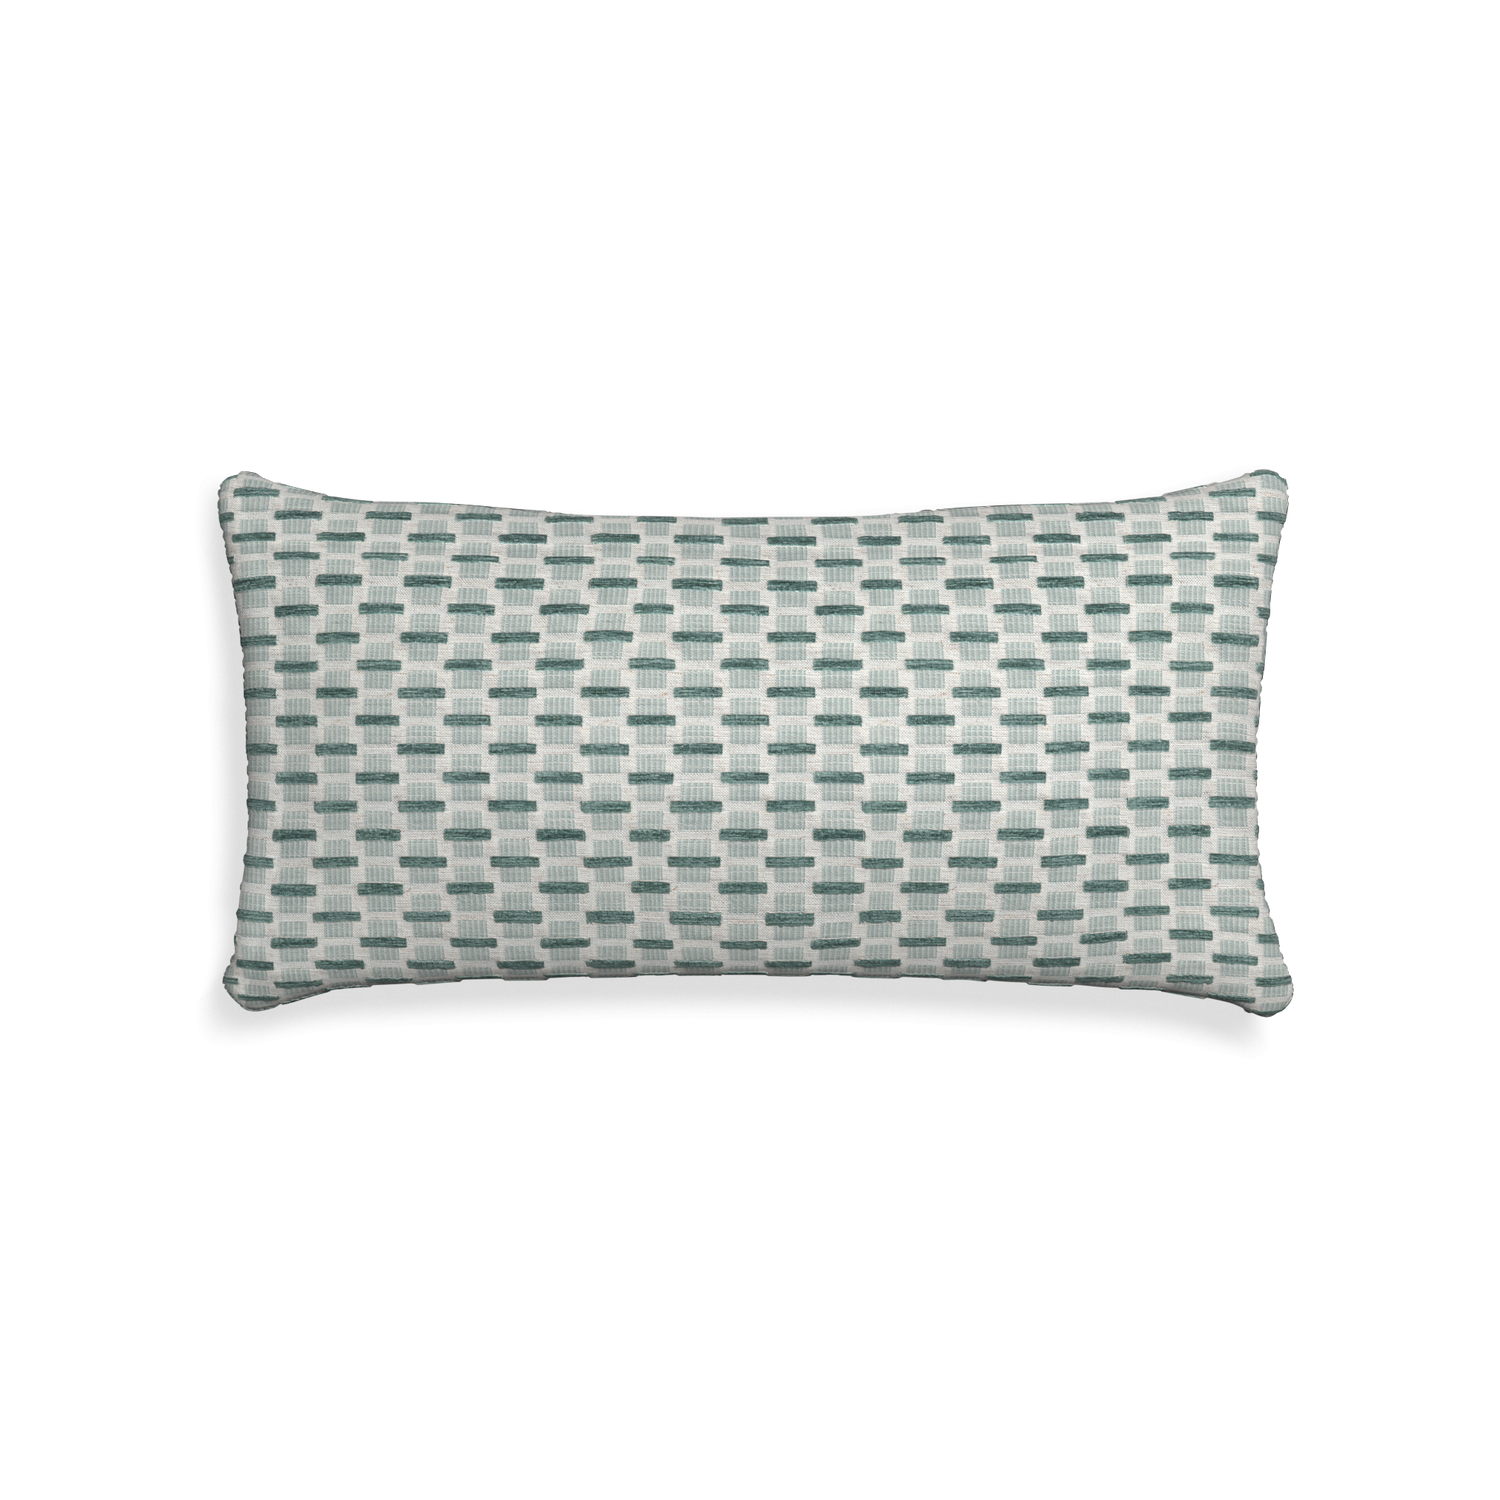 Midi-lumbar willow mint custom green geometric chenillepillow with none on white background